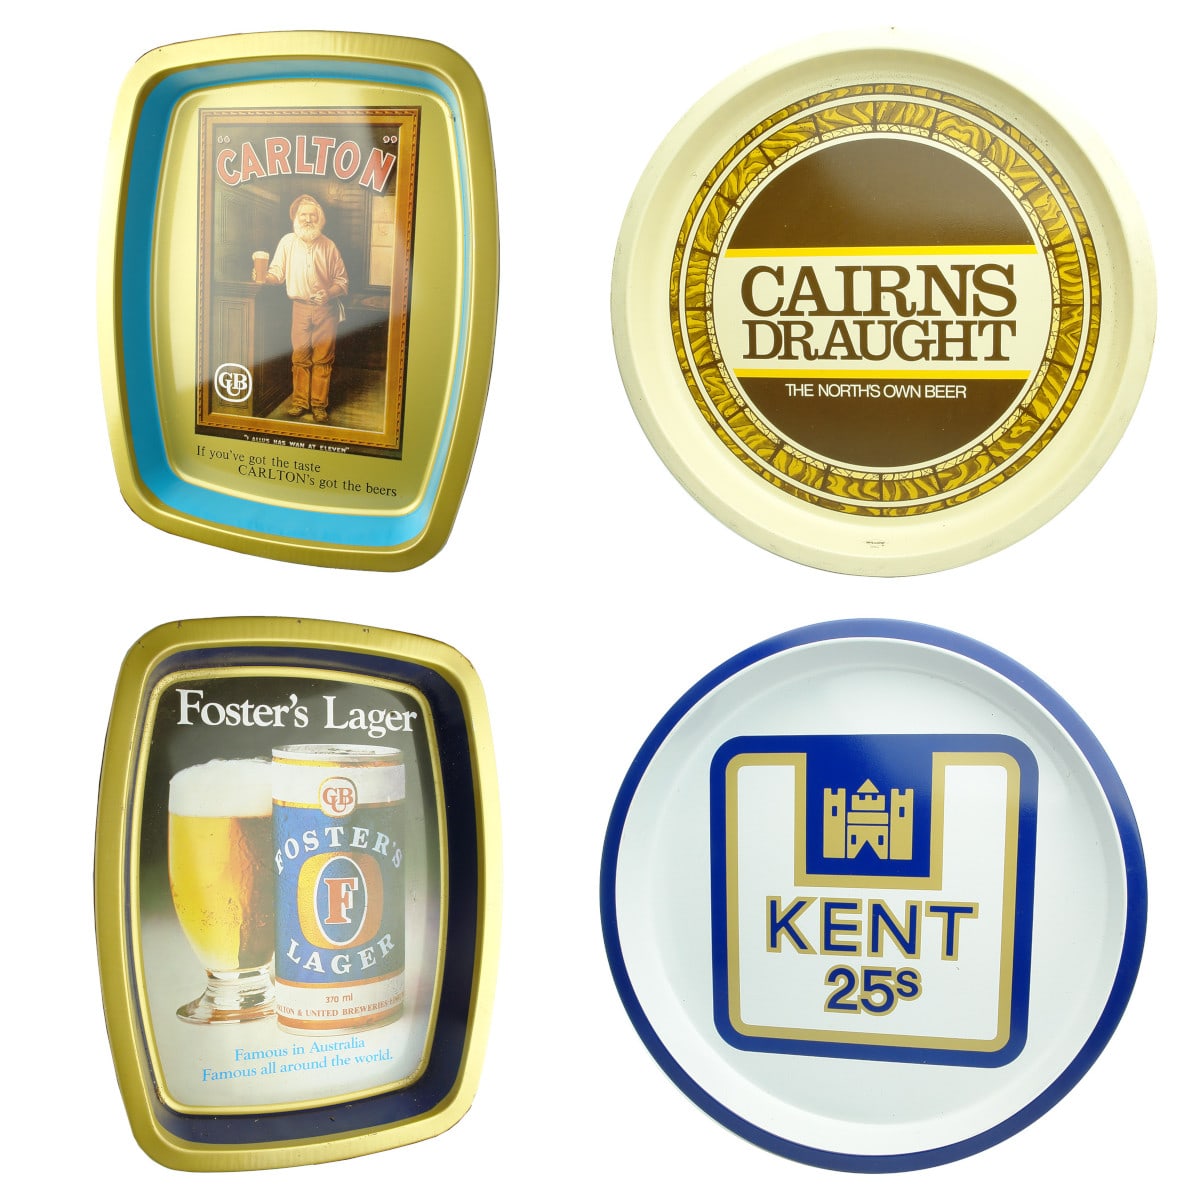 4 Serving Trays. Carlton; Cairns Draught; Foster's Lager & Kent 25s.